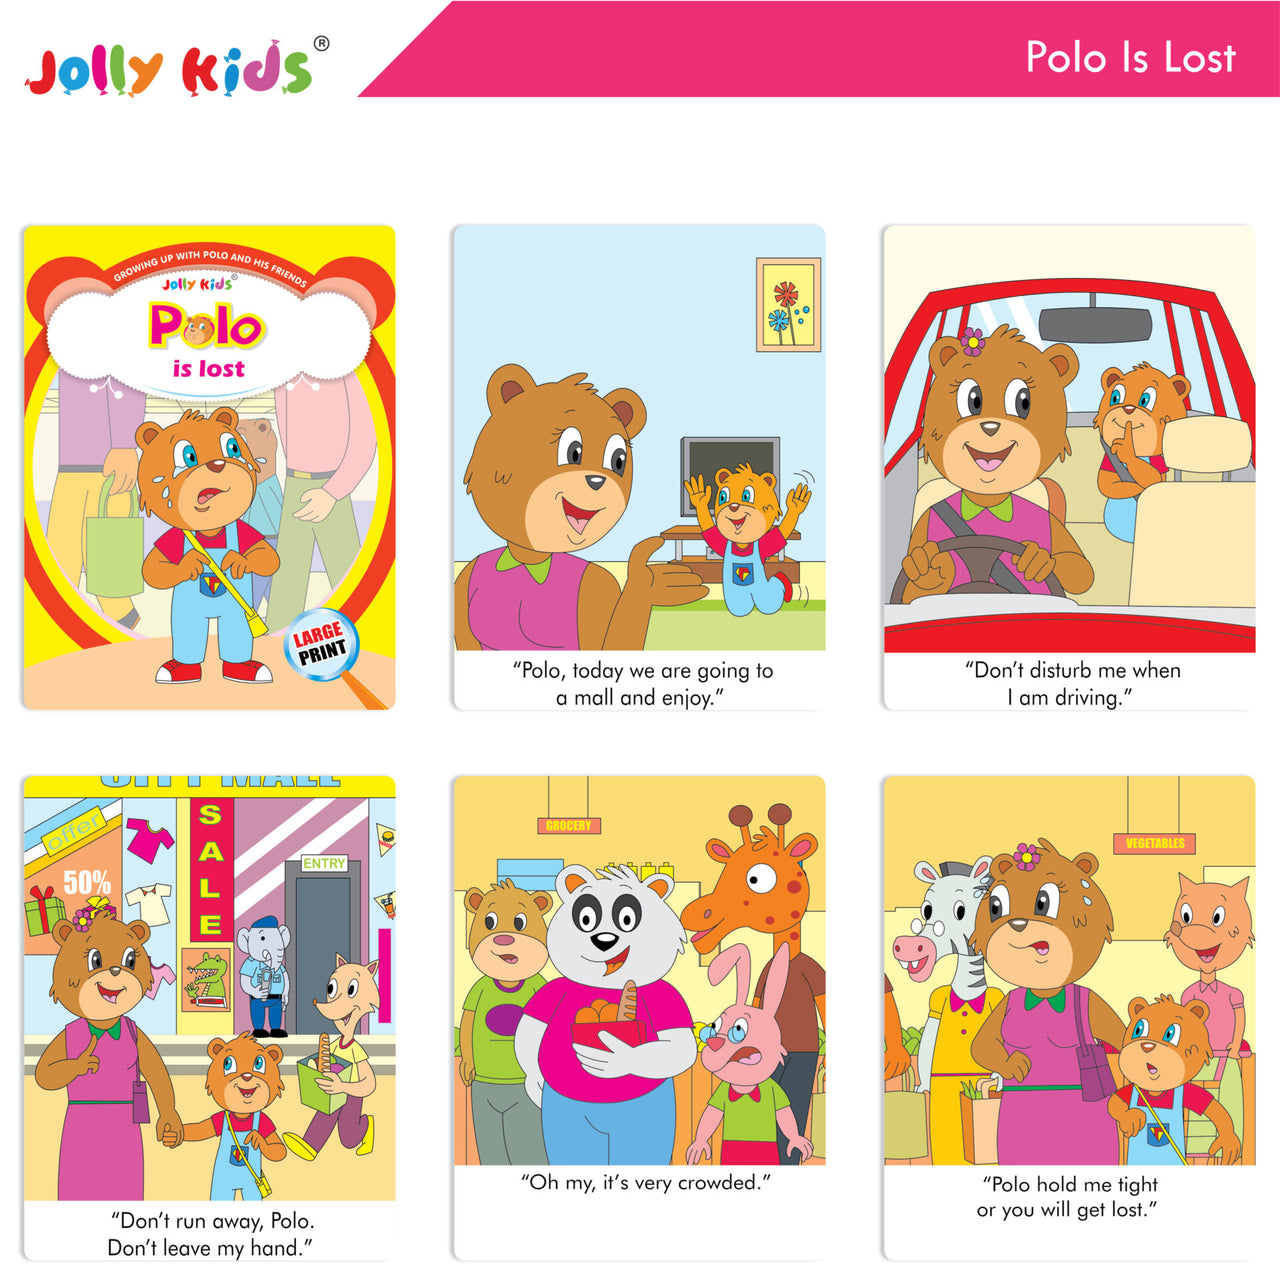 Jolly Kids Growing Up with Polo and His Friends Character Base Stories Books Set of 8| Large Picture Stories Books for Kids Ages 3 -8 Years - Distacart